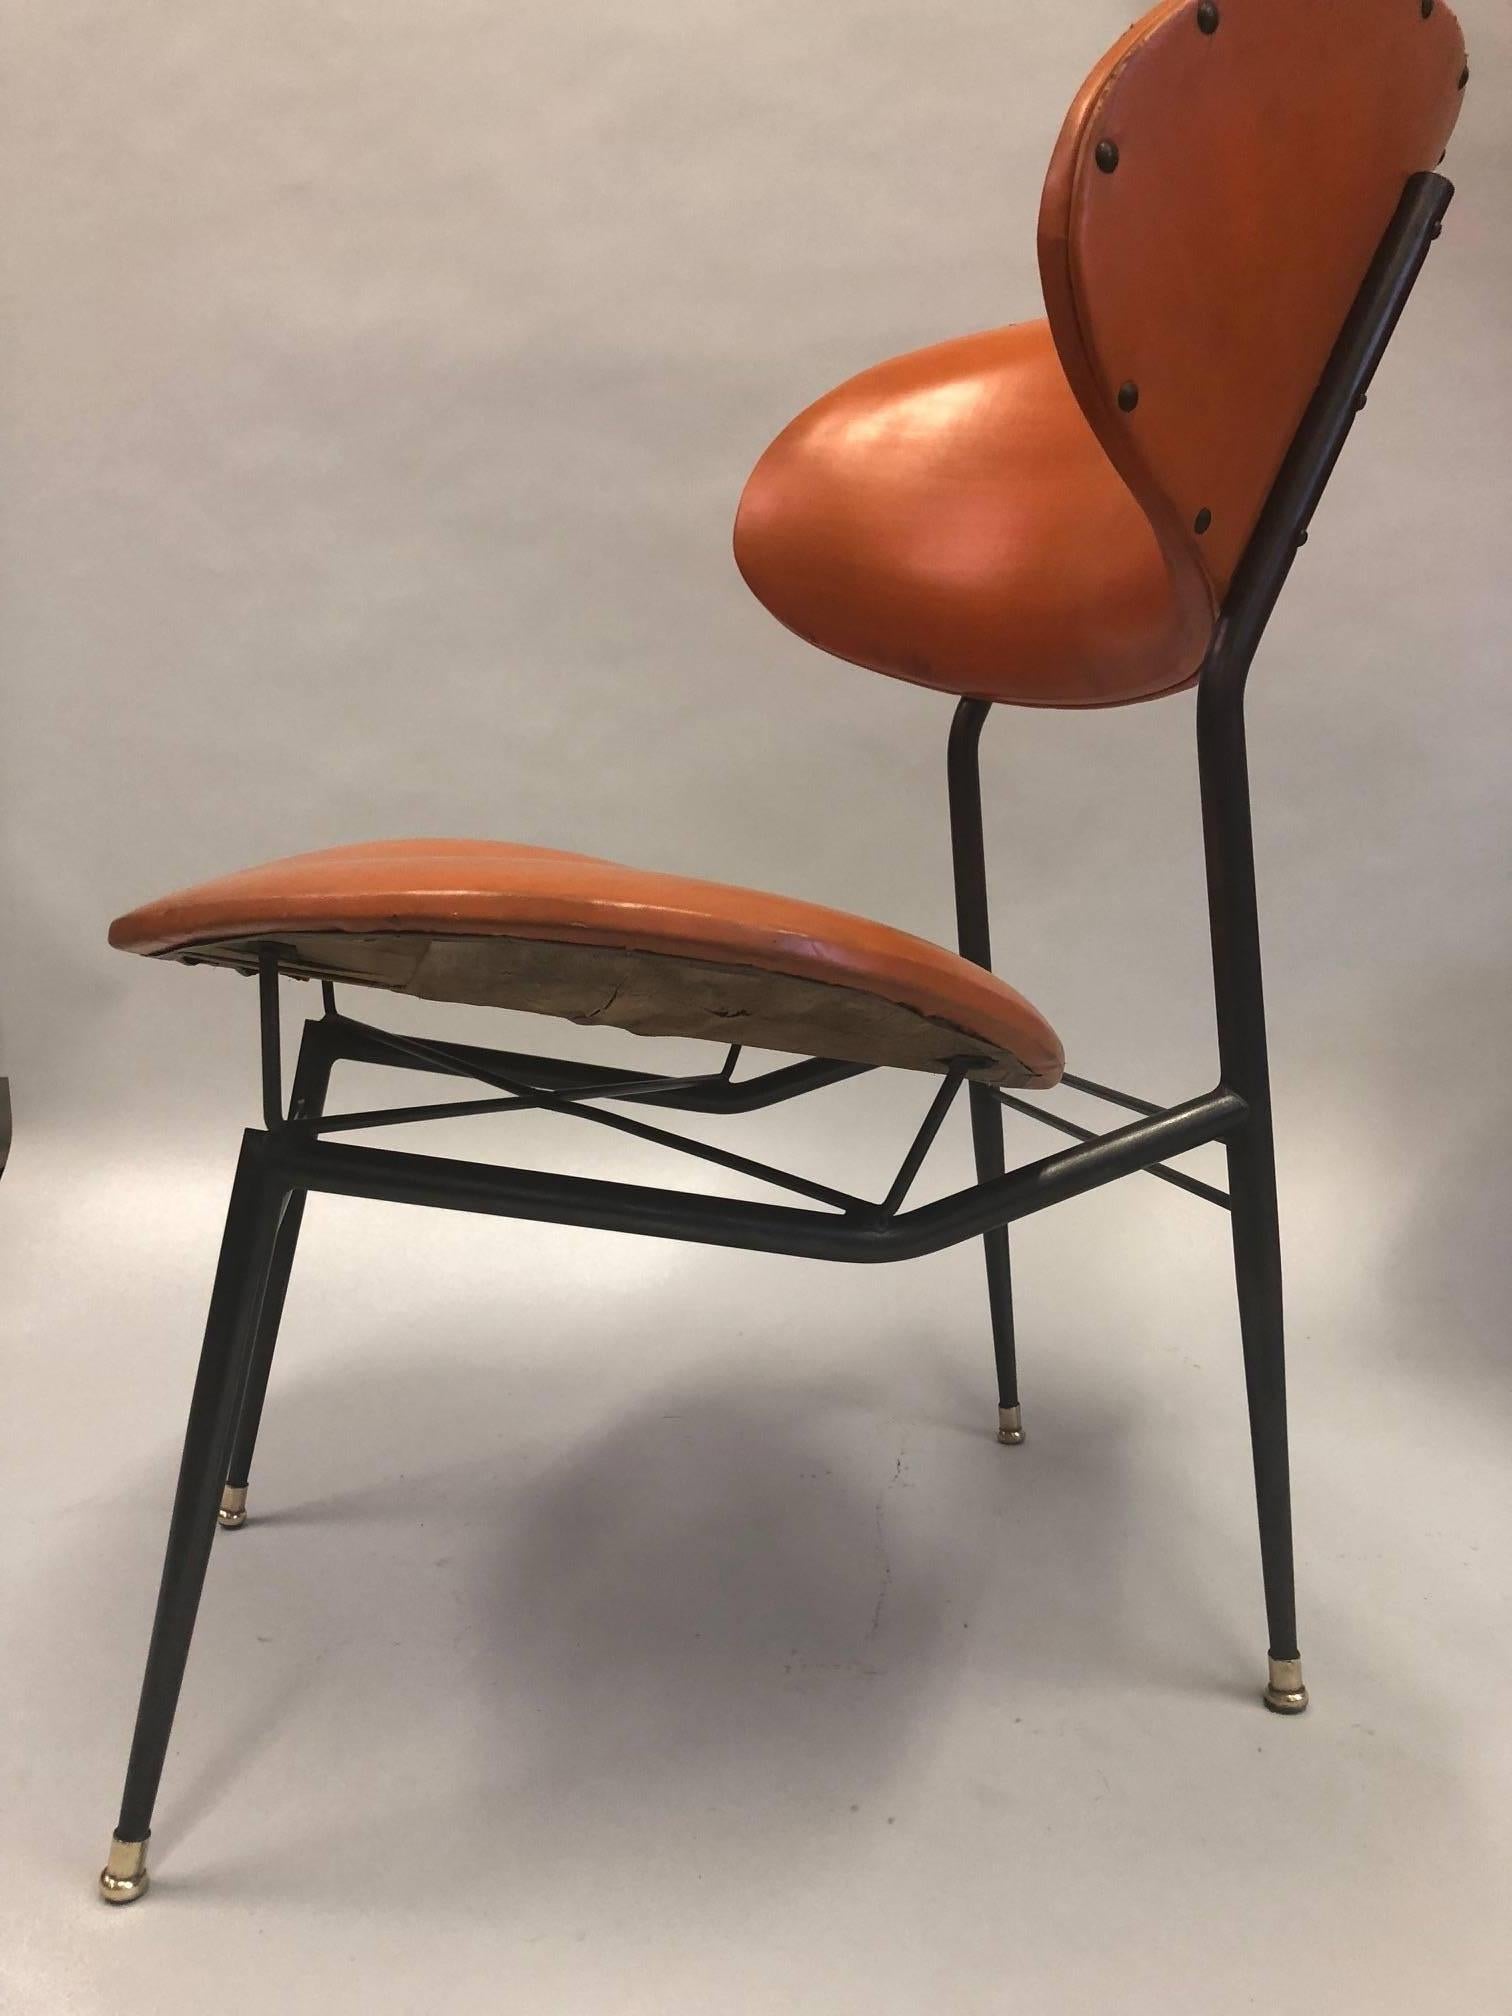 Two Pairs of Italian Mid-Century Modern Lounge Chairs by Gastone Rinaldi For Sale 2